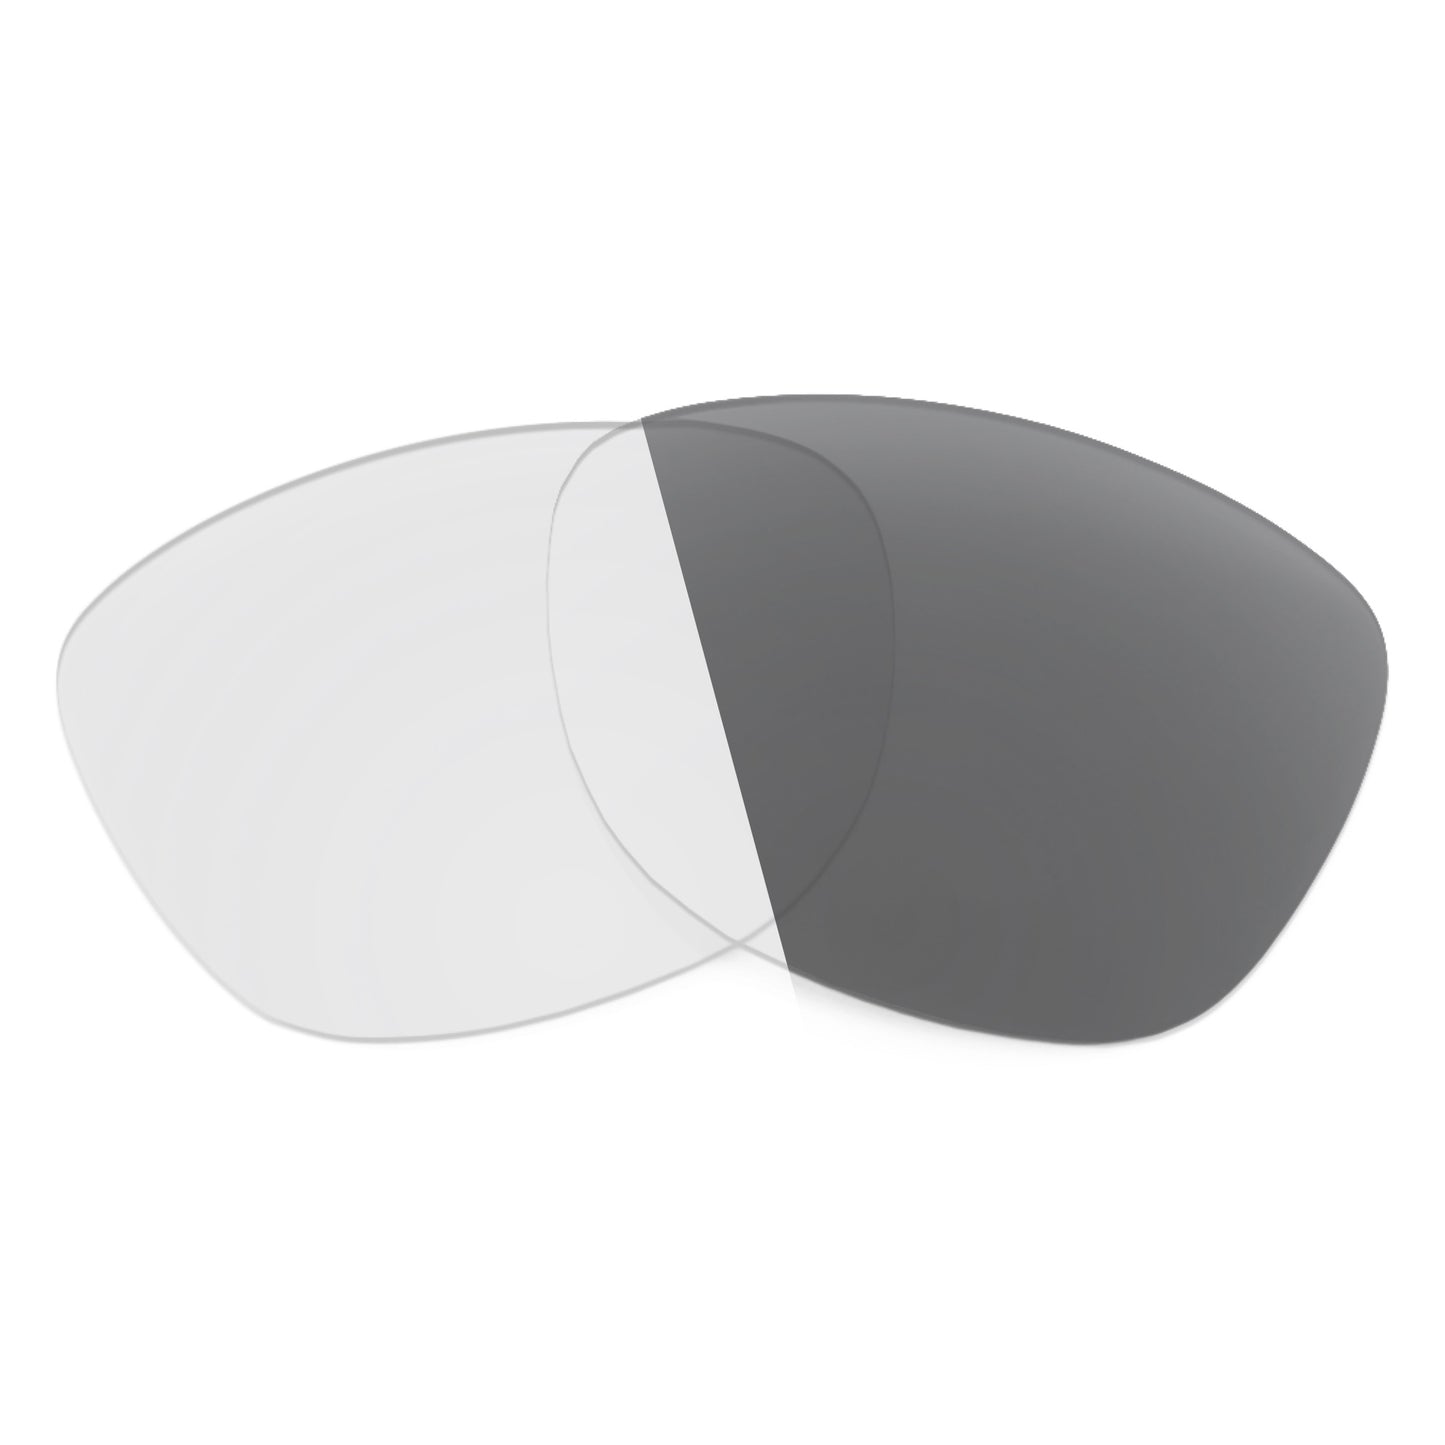 Revant replacement lenses for Ray-Ban Mr. Burbank RB2283 55mm Non-Polarized Adapt Gray Photochromic